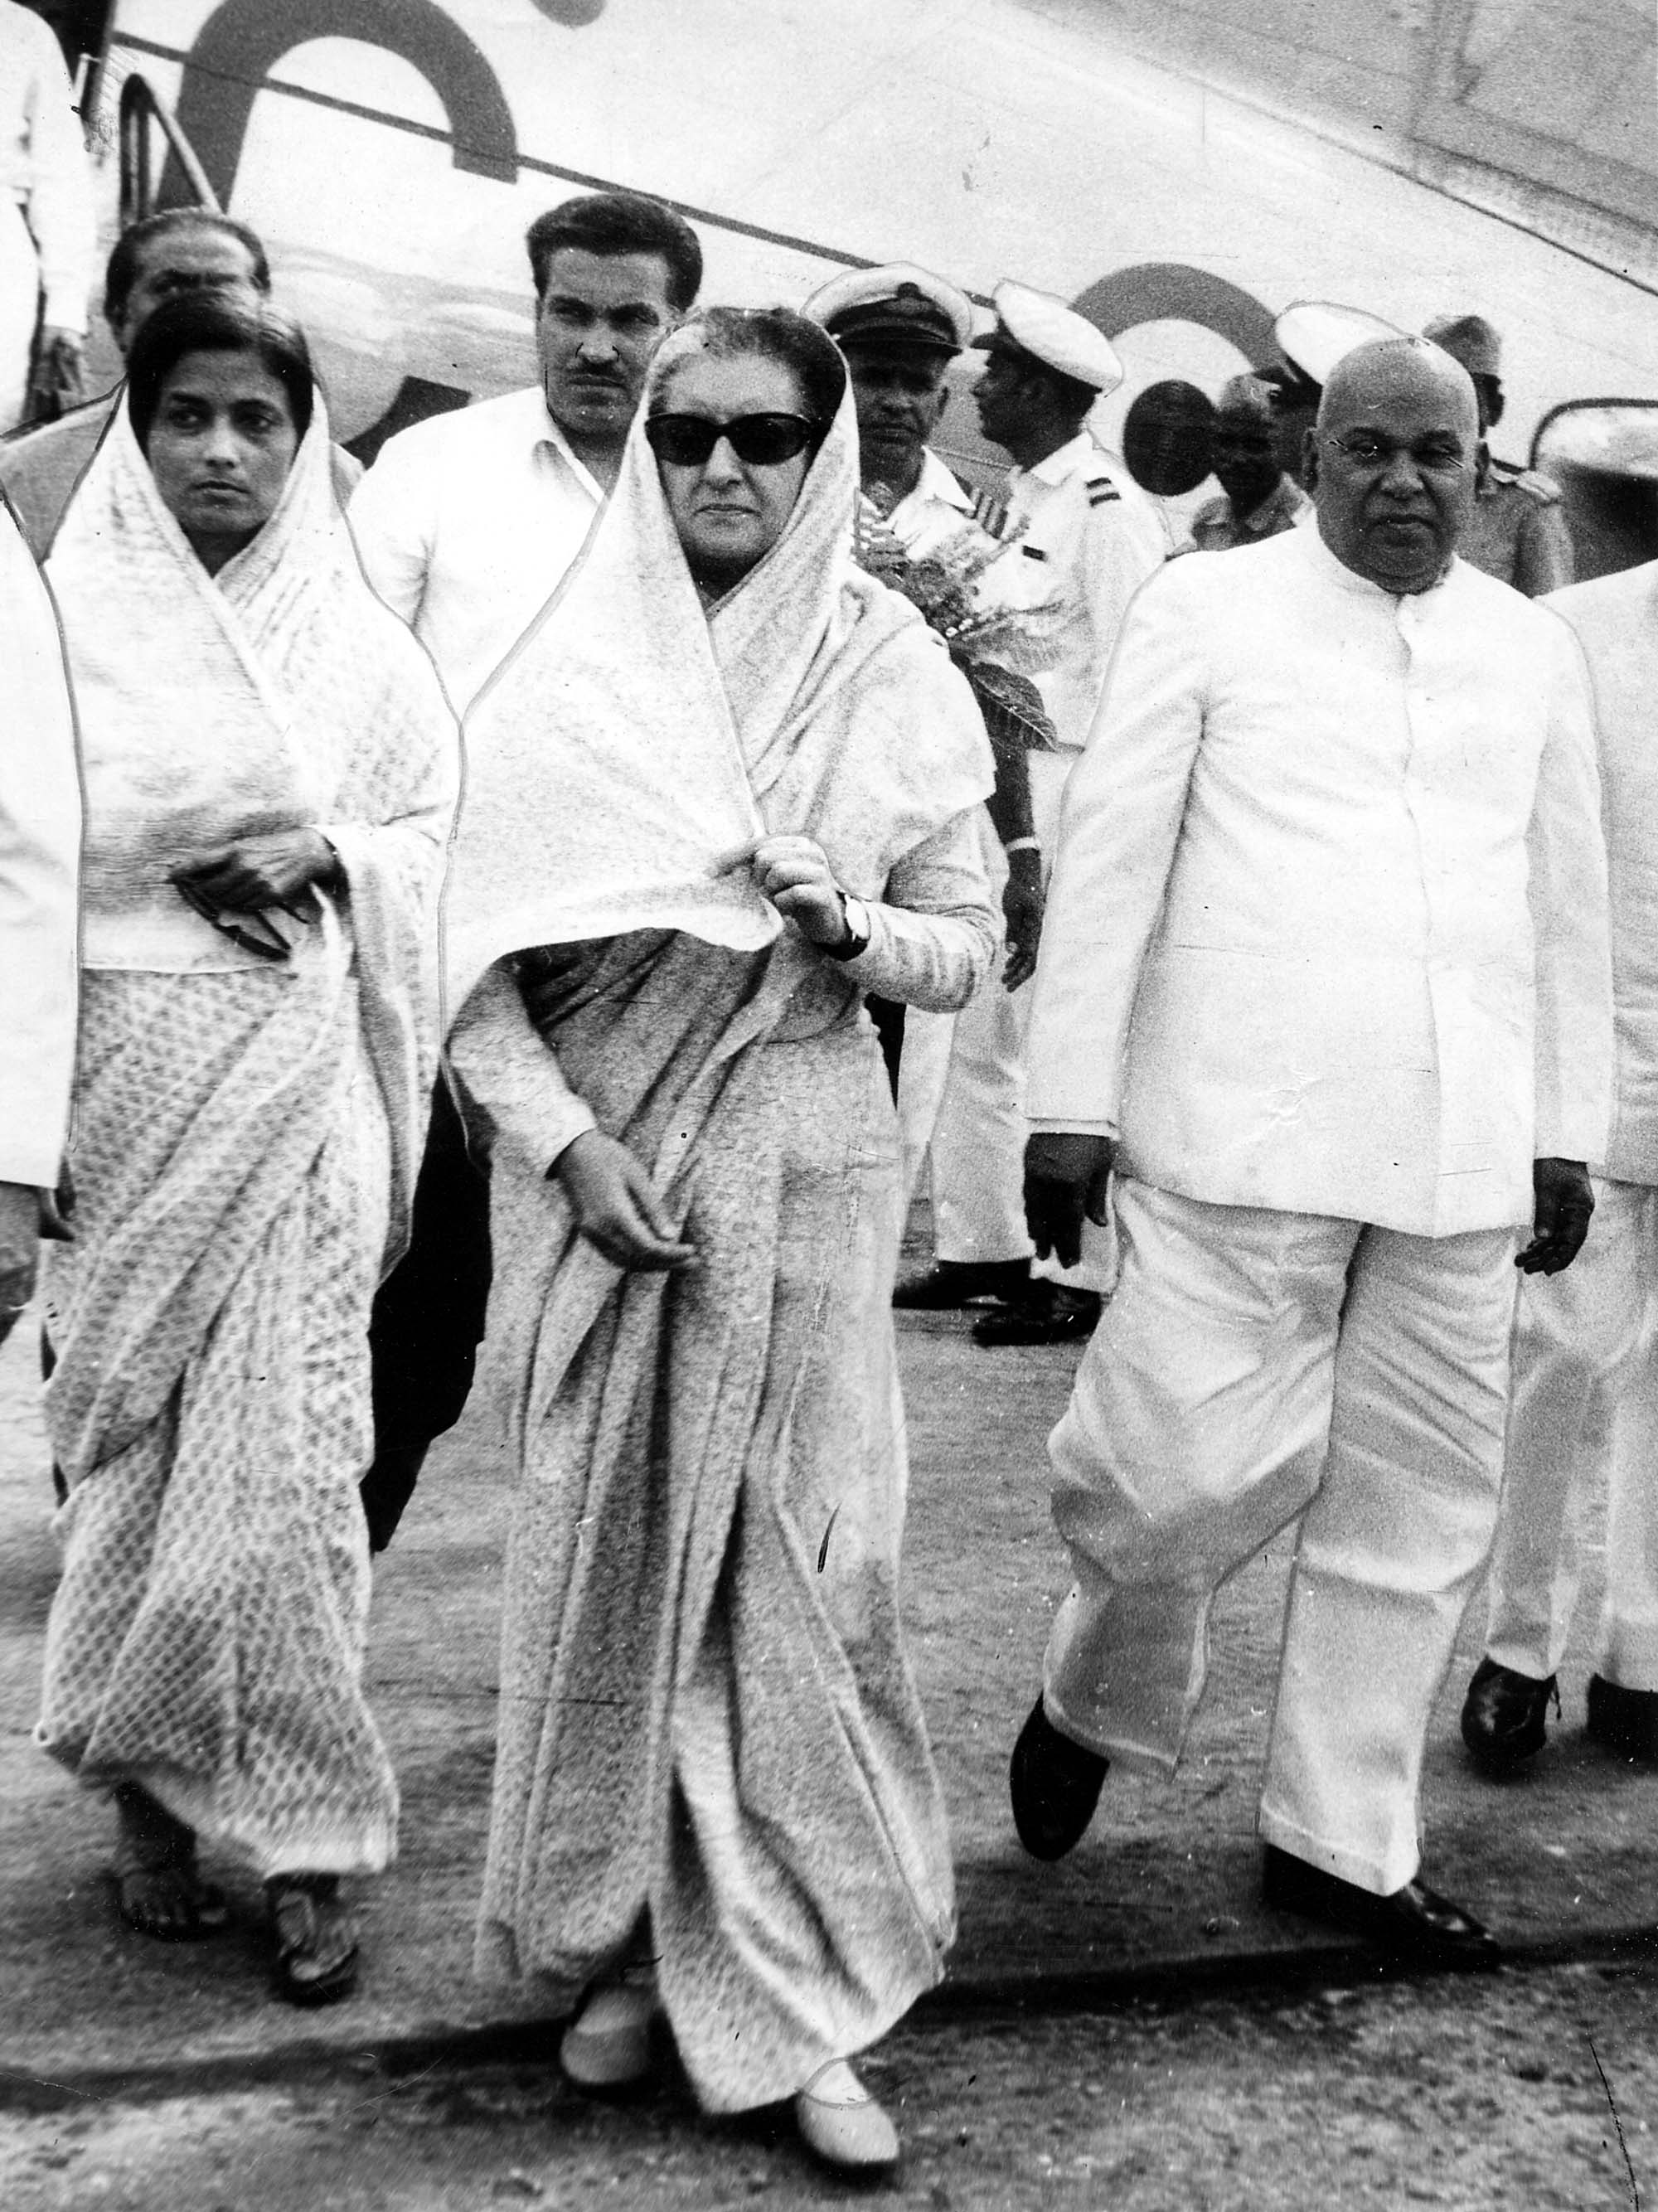 The R&AW owes much to the vision of Indira Gandhi, but in the last decade, it seems to have disregarded her advice.